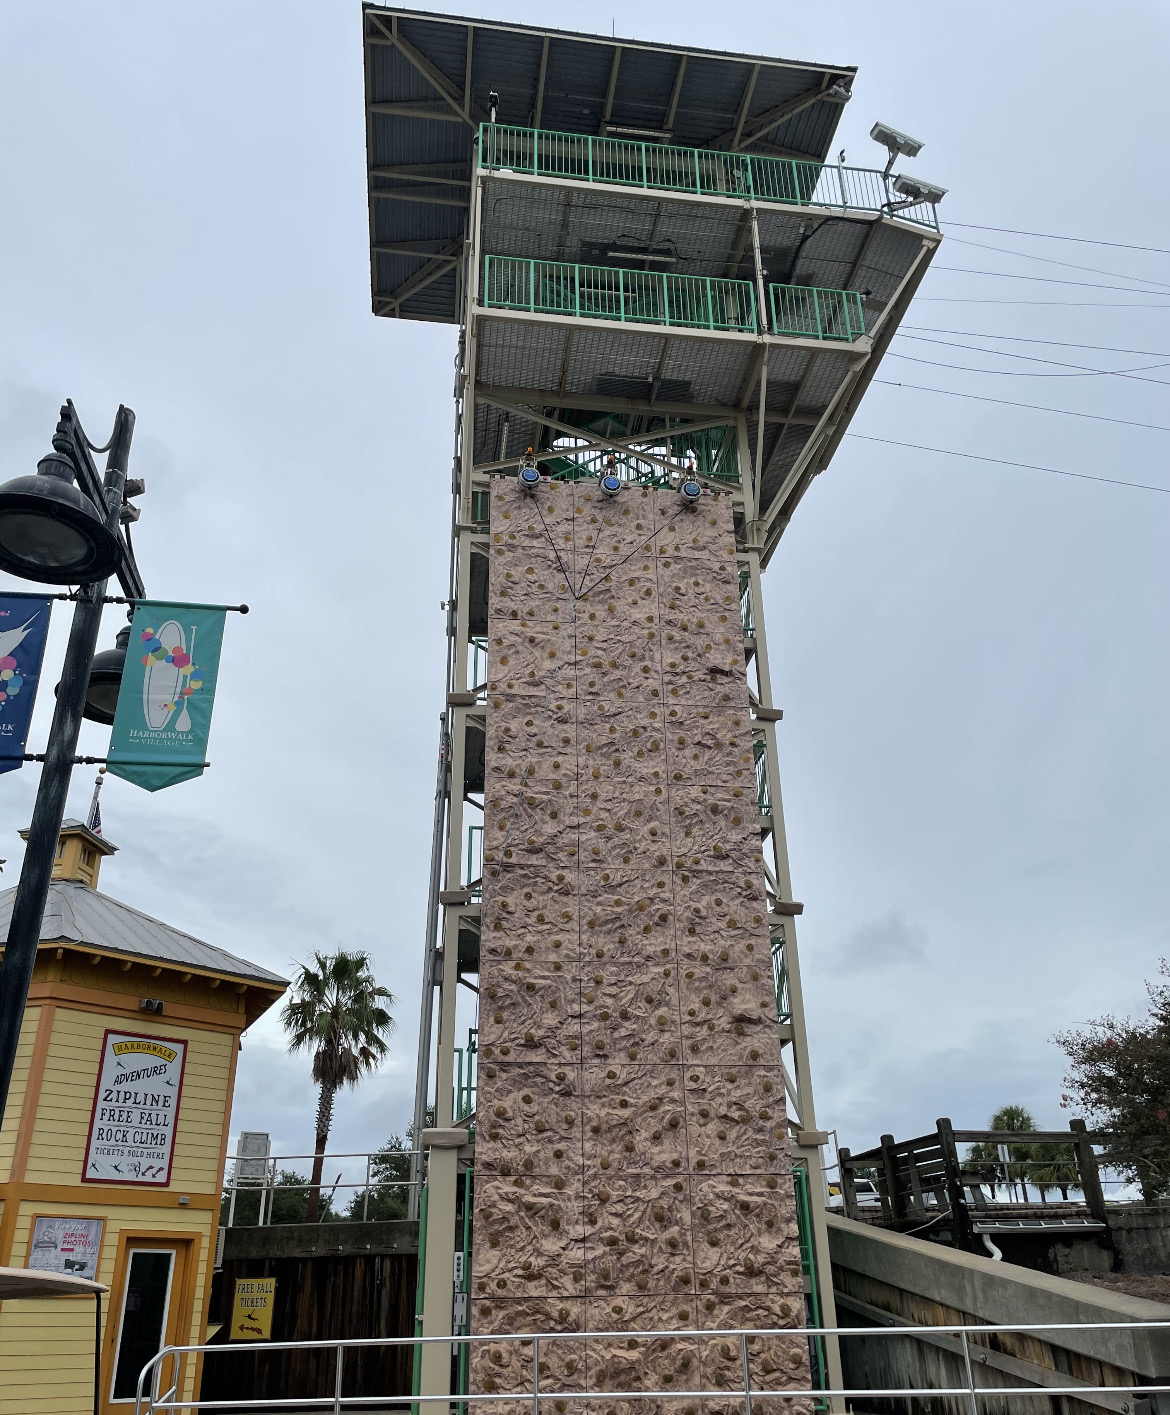 The rock climbing wall is a fun and safe activity for kids and adults